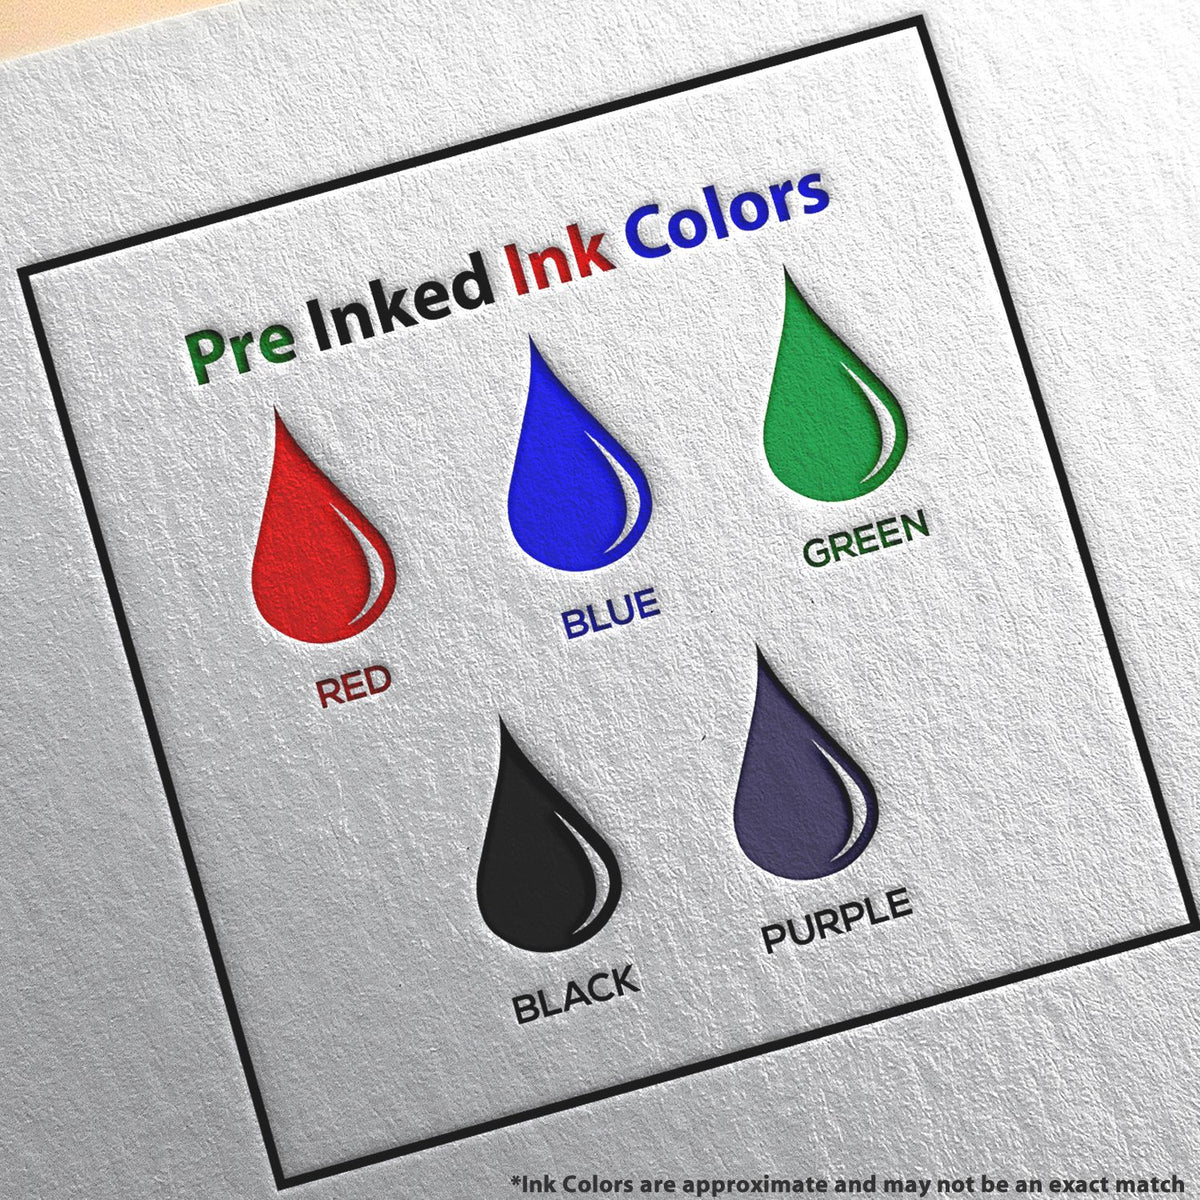 A picture showing the different ink colors or hues available for the Premium MaxLight Pre-Inked Washington Landscape Architectural Stamp product.